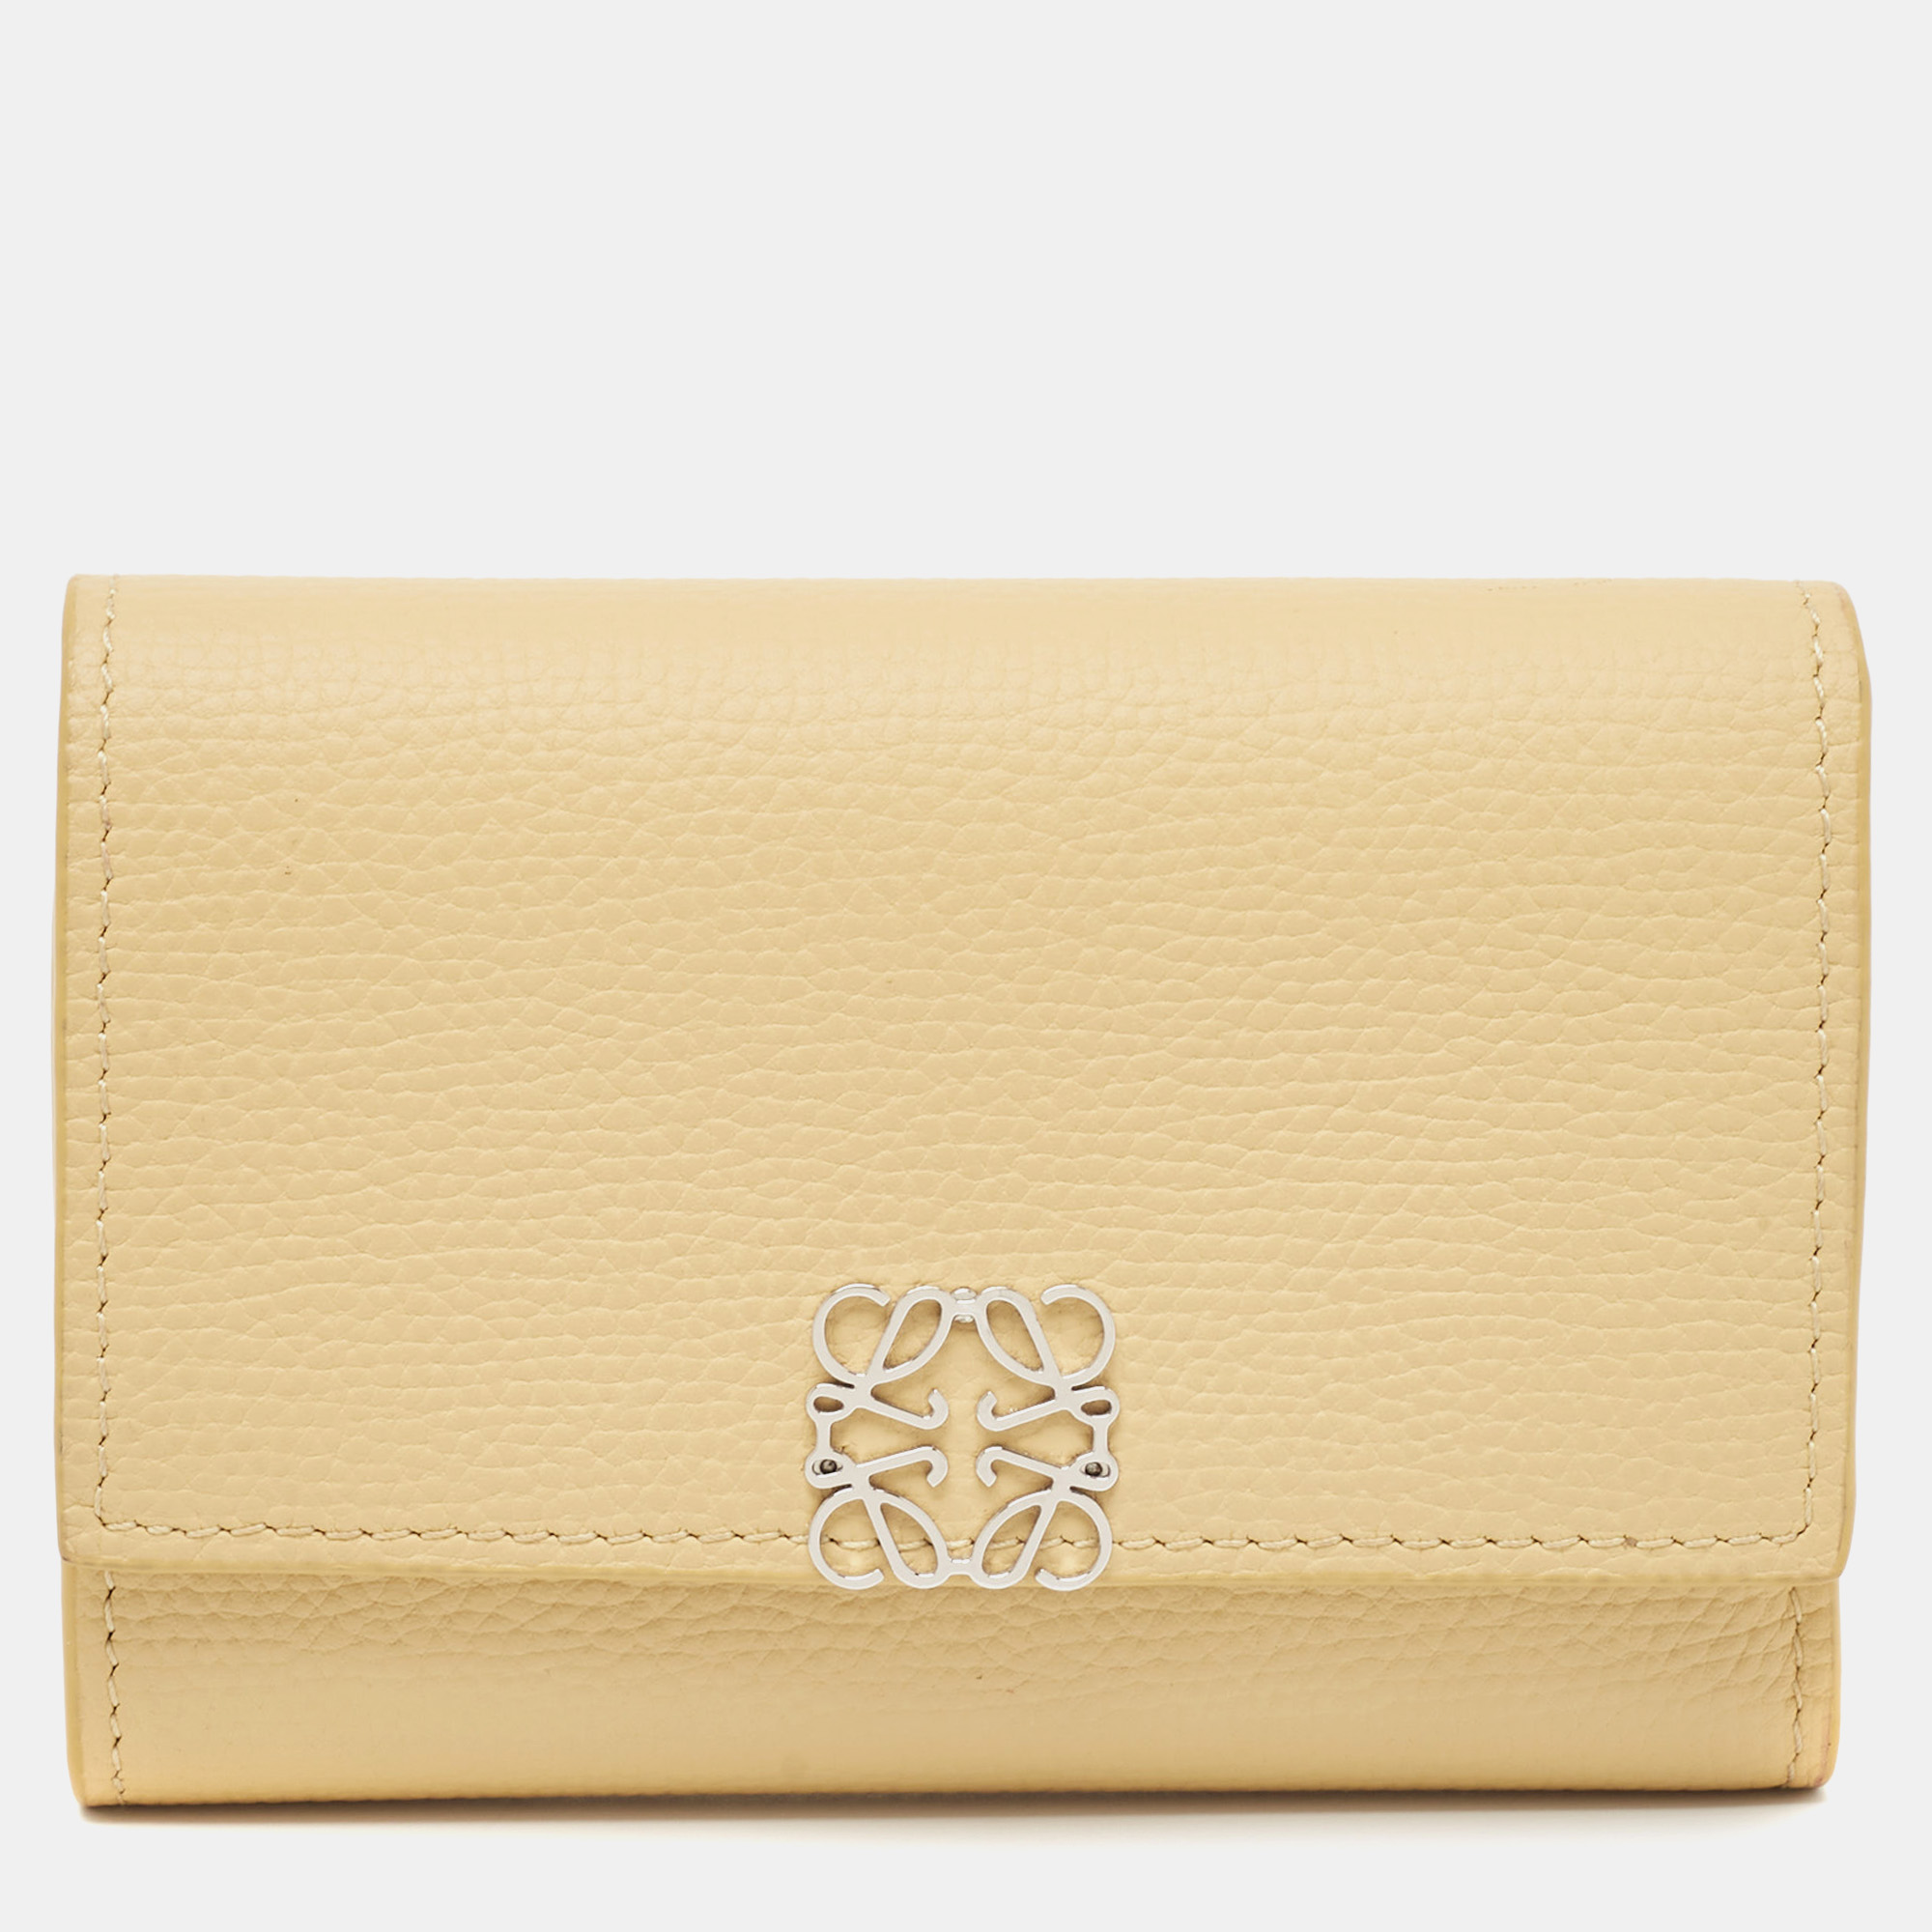 Loewe yellow leather anagram trifold wallet